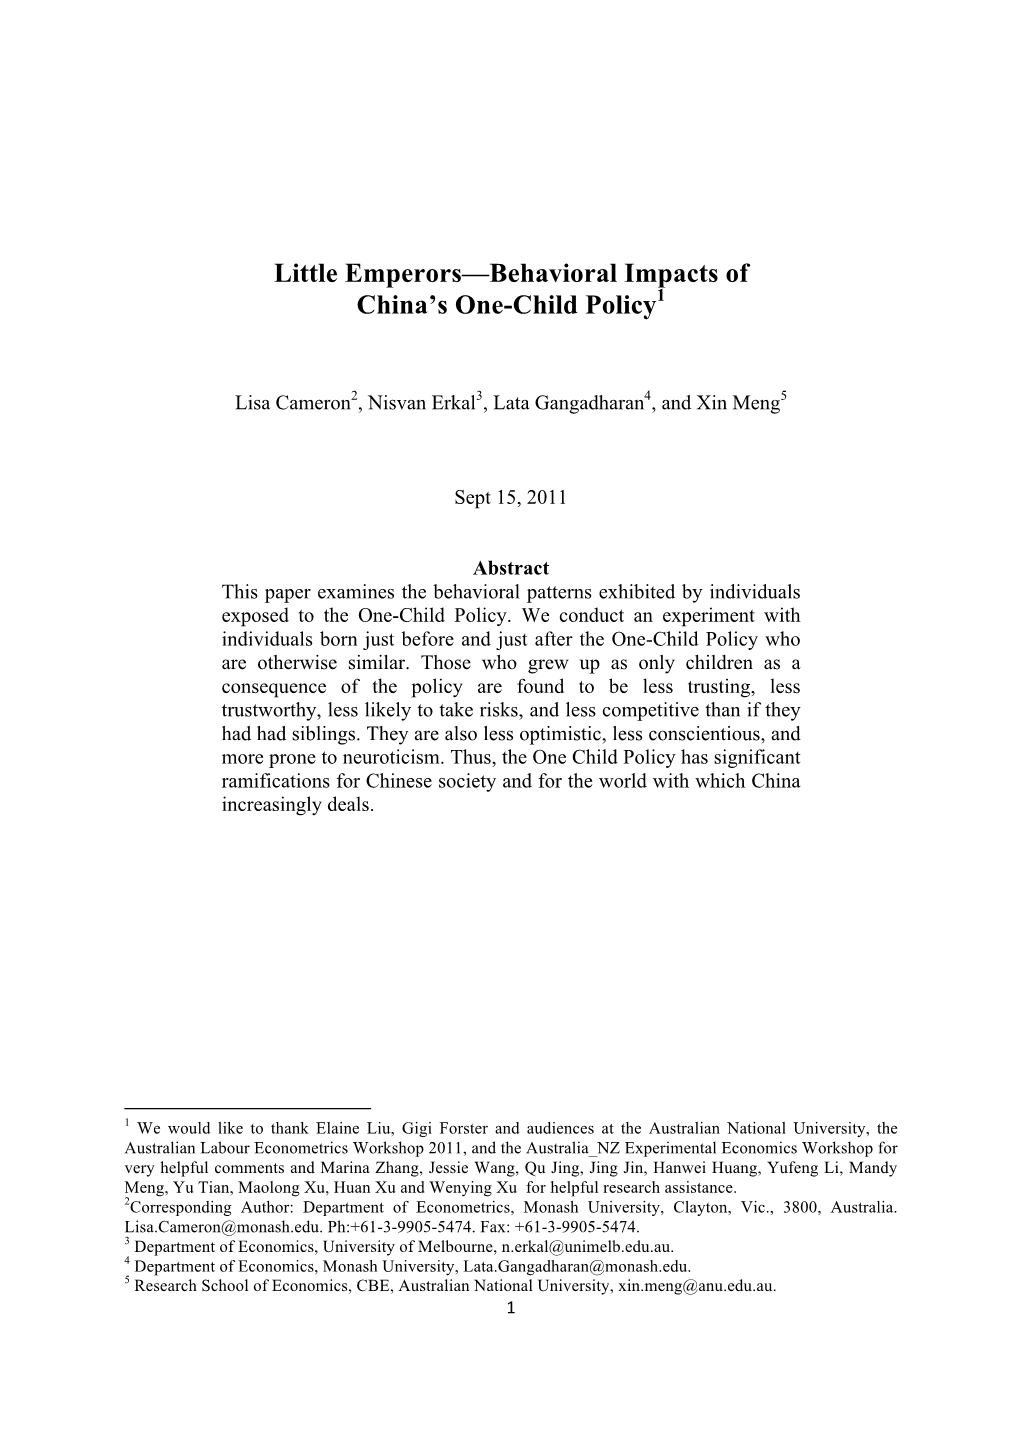 Little Emperors—Behavioral Impacts of China's One-Child Policy1